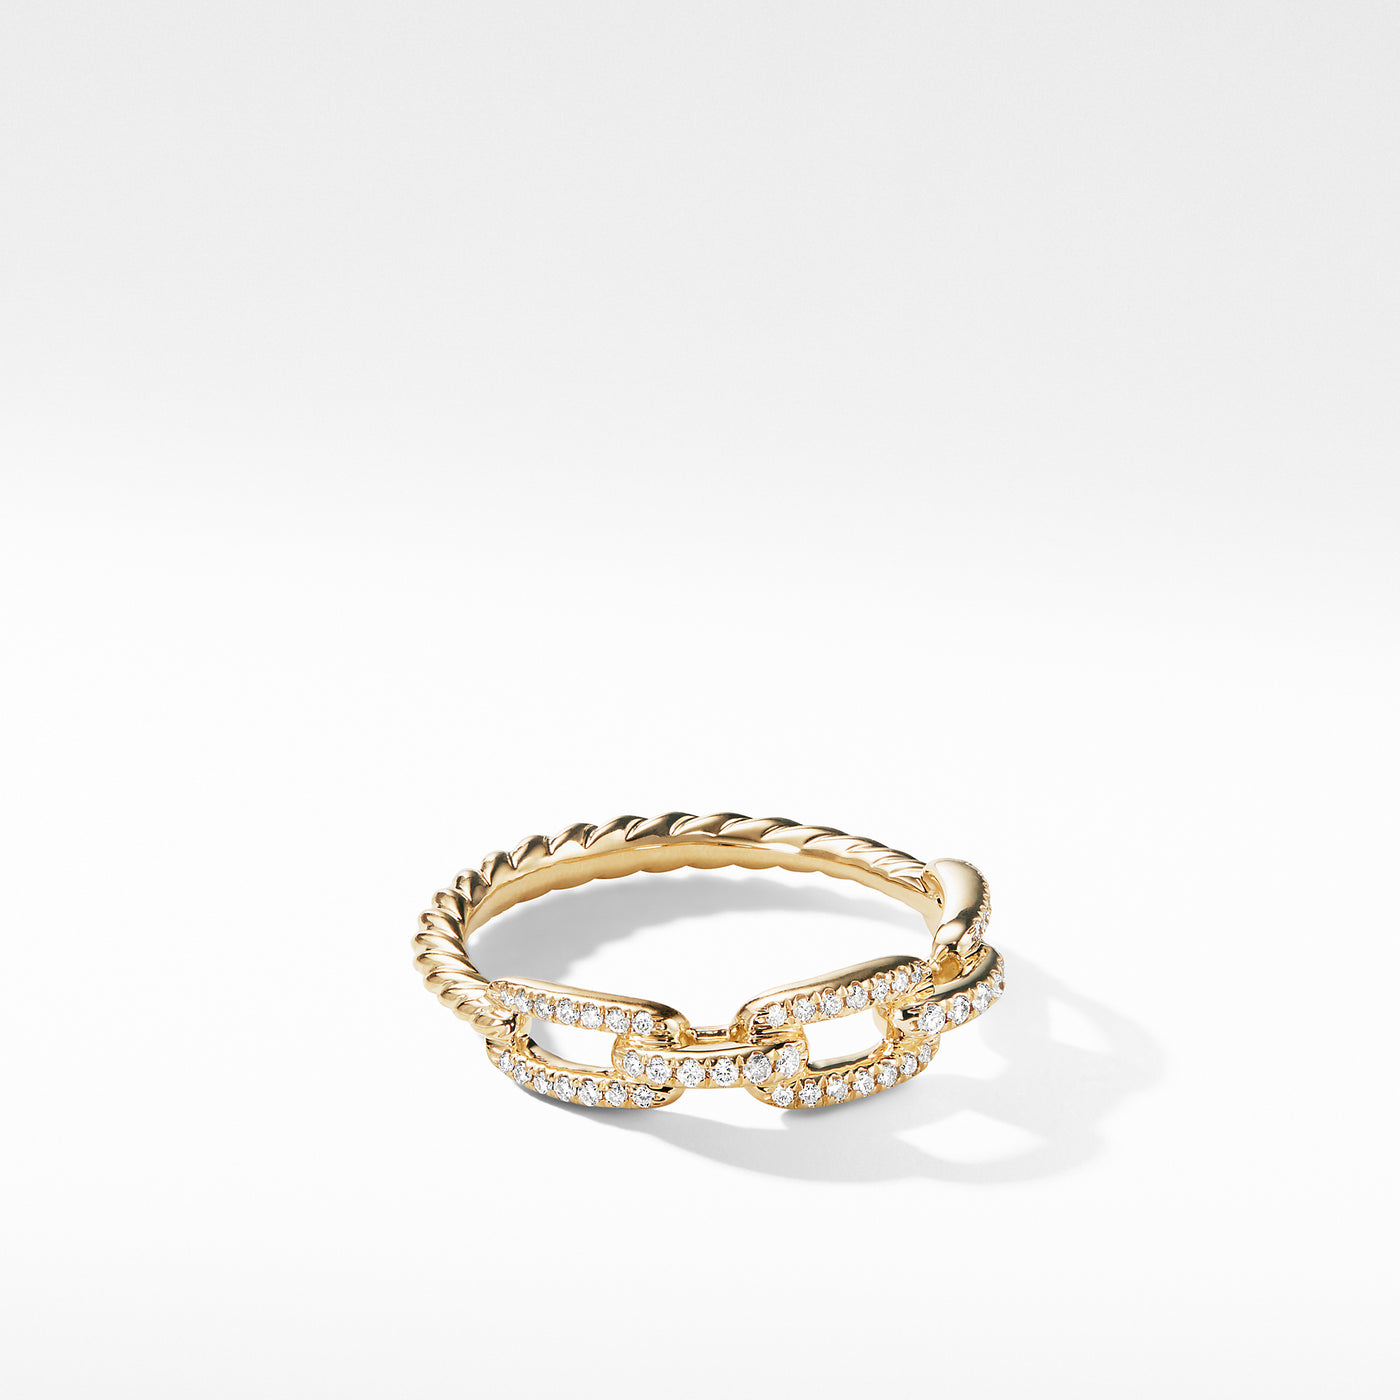 Stax Chain Link Ring in 18K Yellow Gold with Diamonds\, 4.5mm